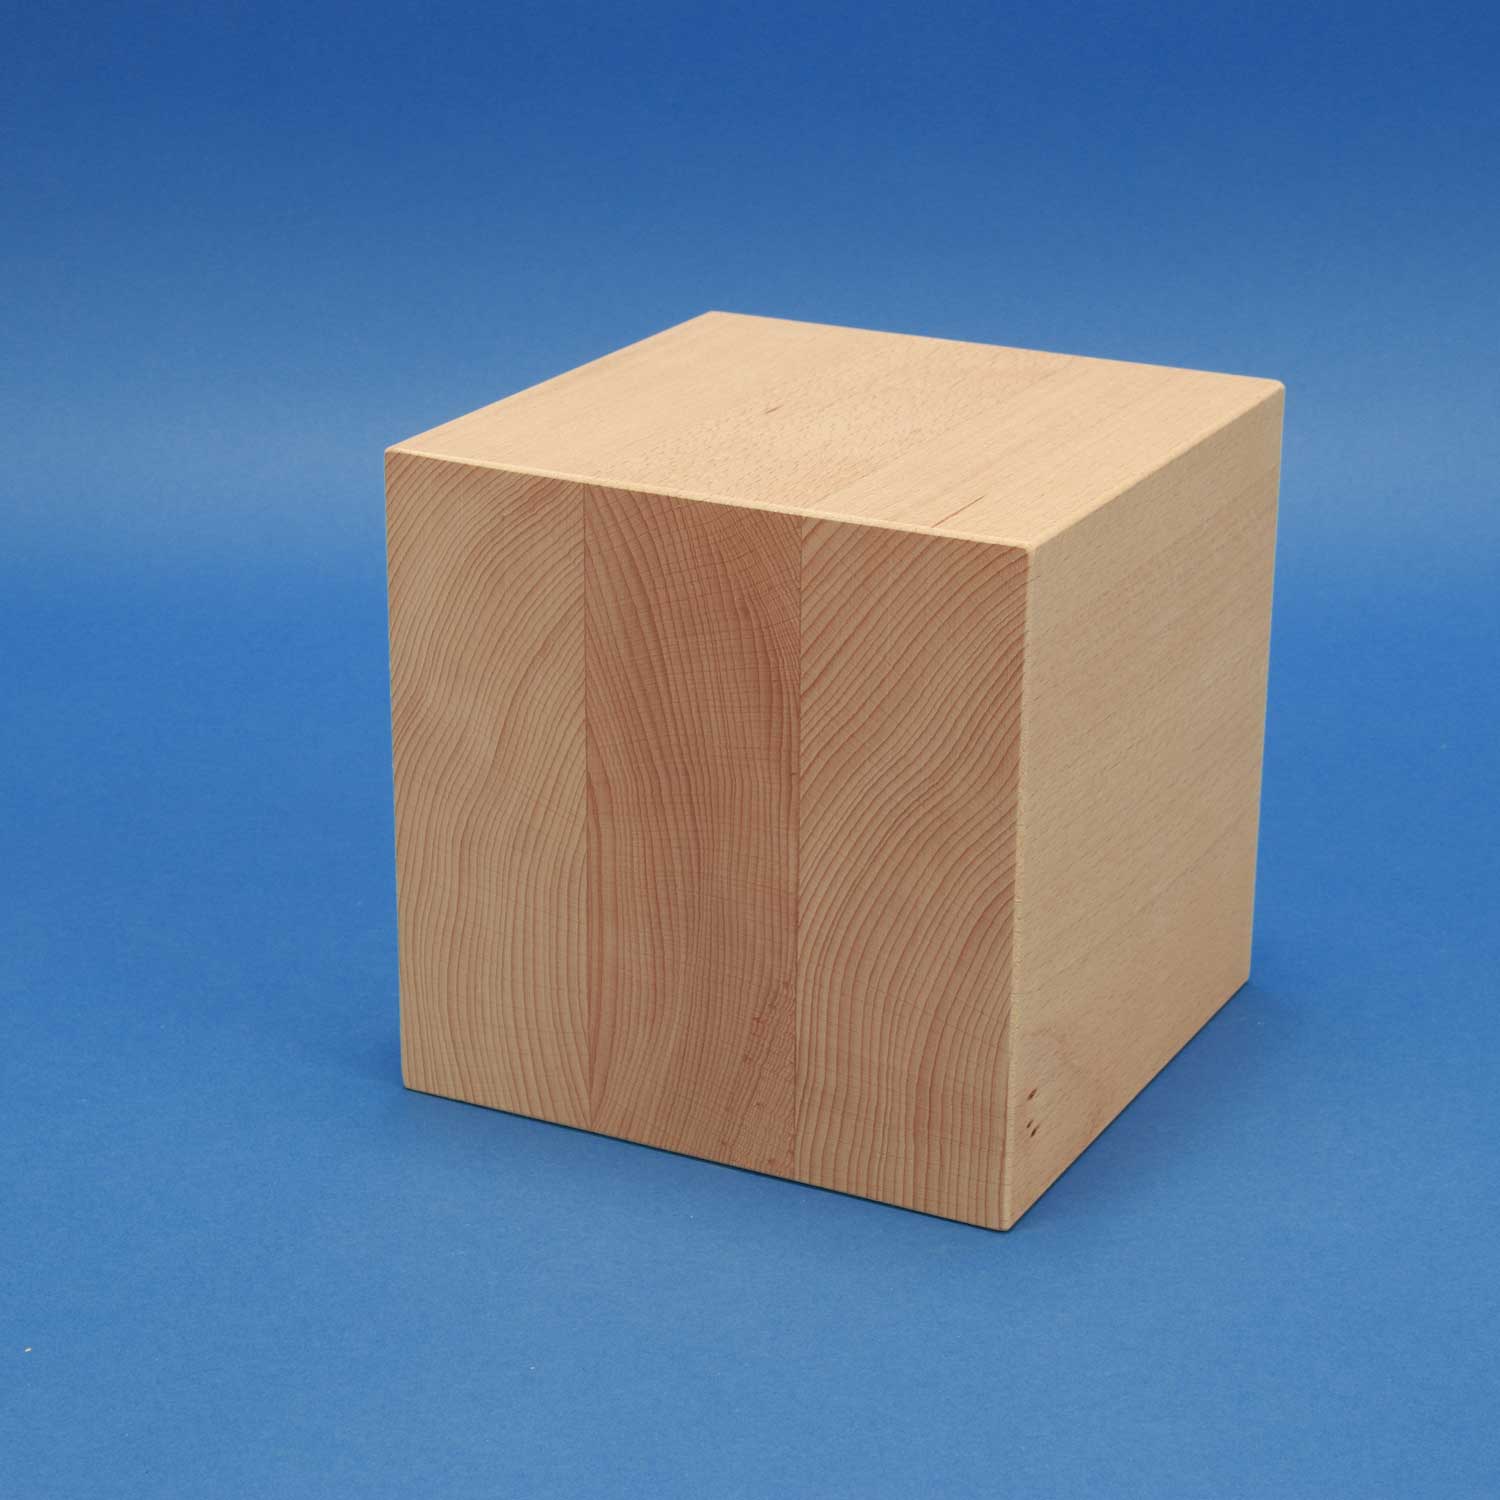 20cm Large Wooden Cubes Wooden Cubes From Beechwood Wooden Cubes